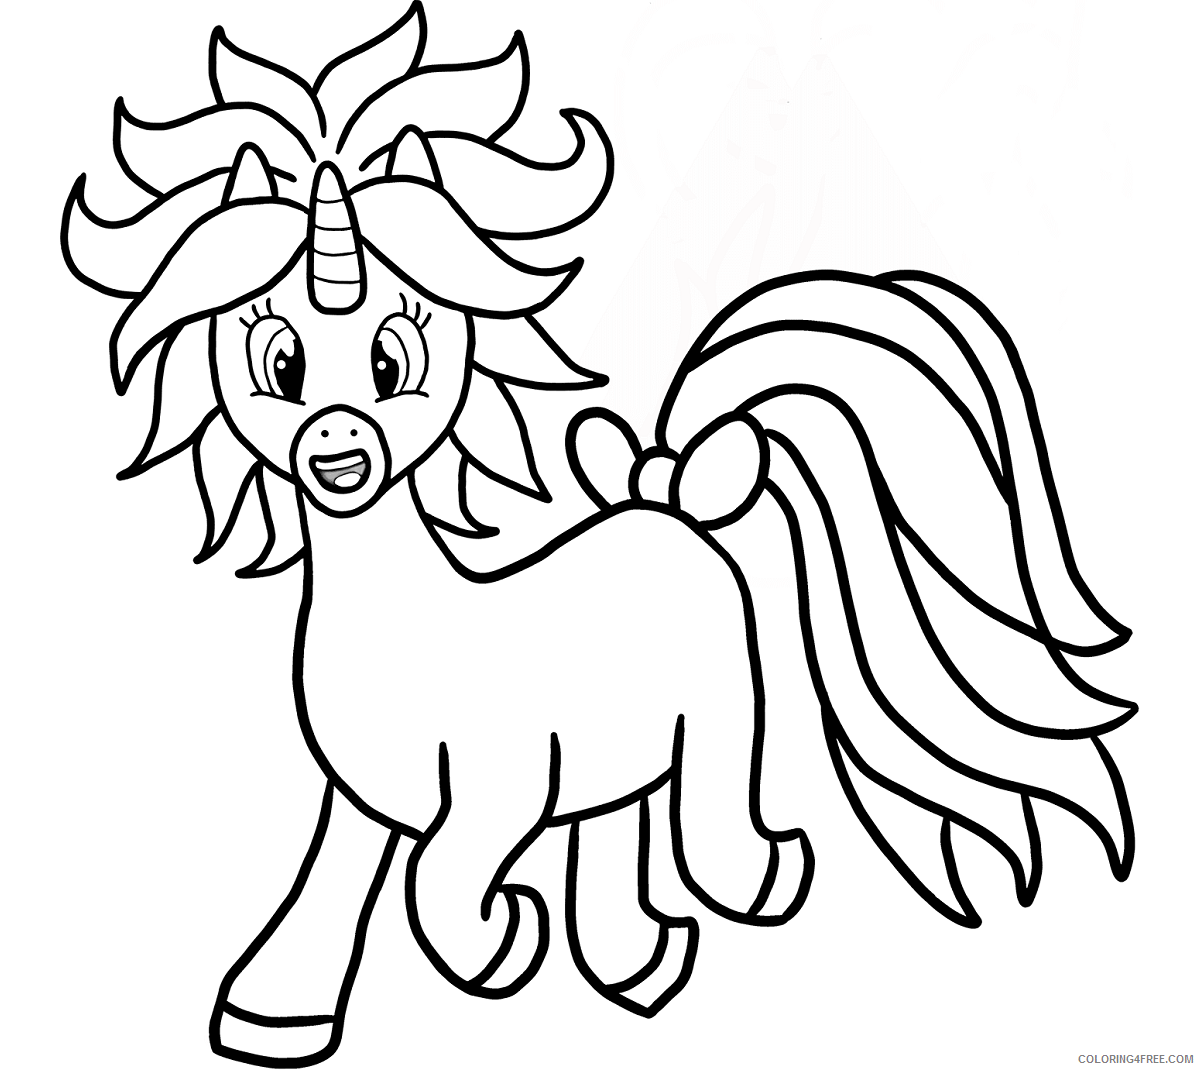 Unicorn Coloring Pages hyperactive unicorn Printable 2021 6042 Coloring4free